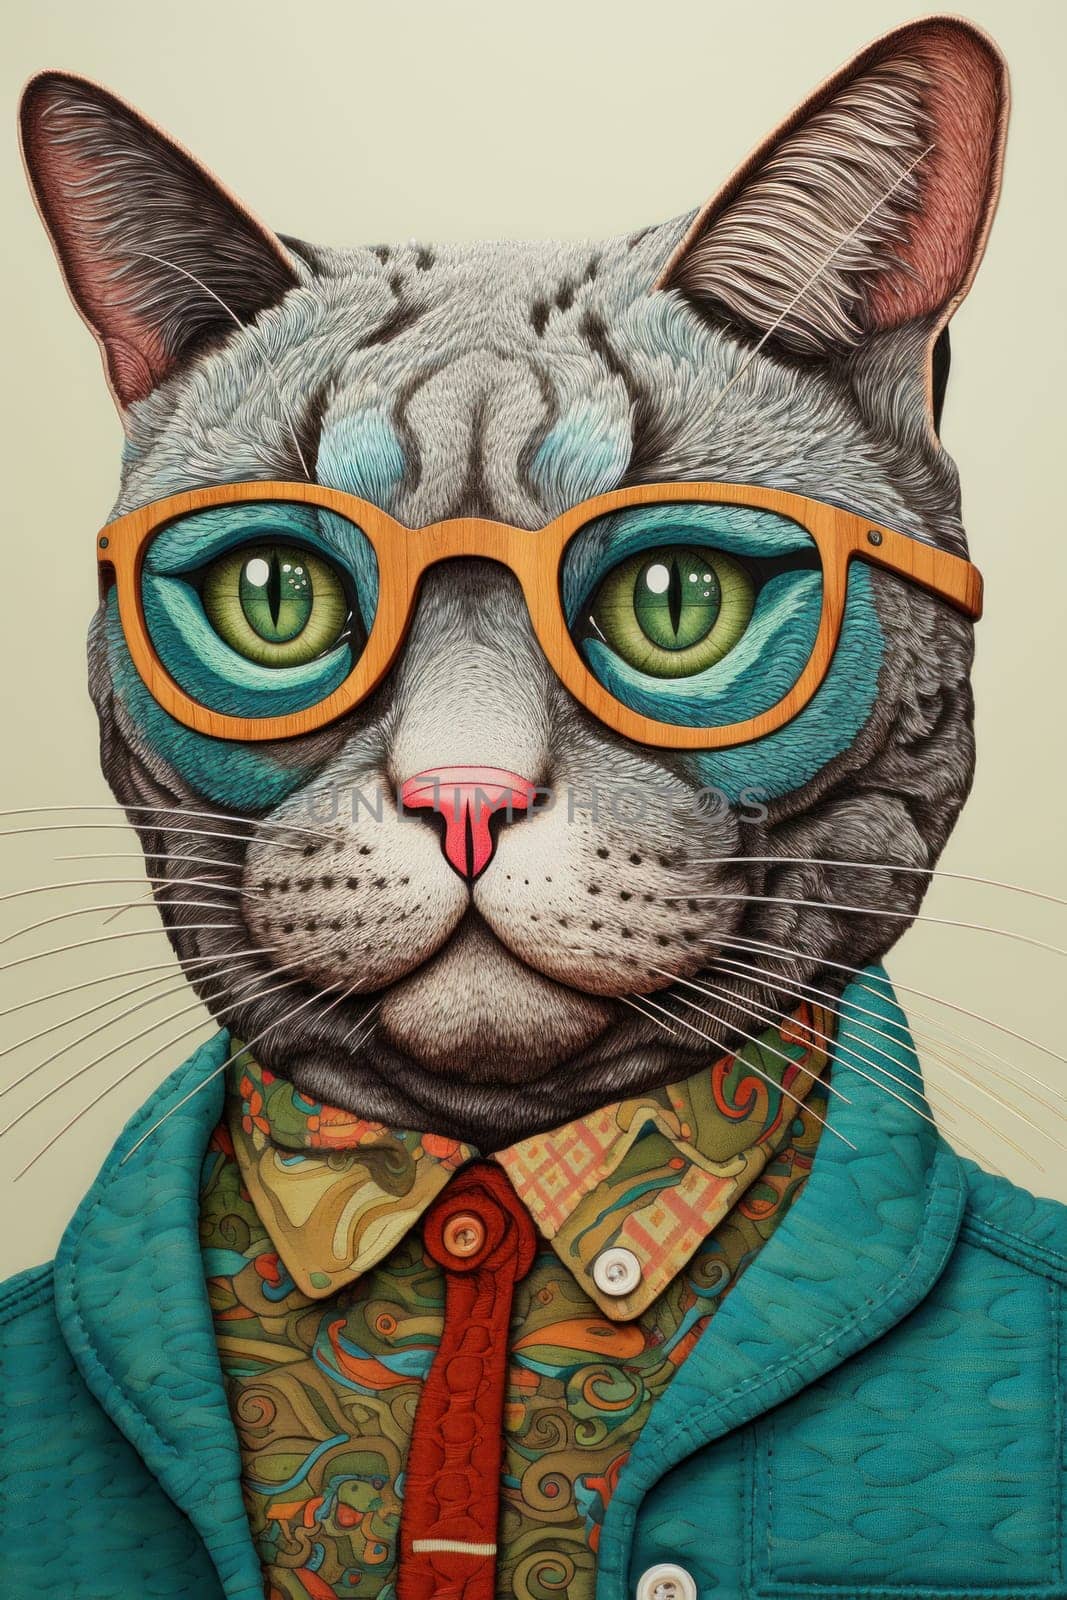 A painting of a cat wearing glasses and a tie, AI by starush